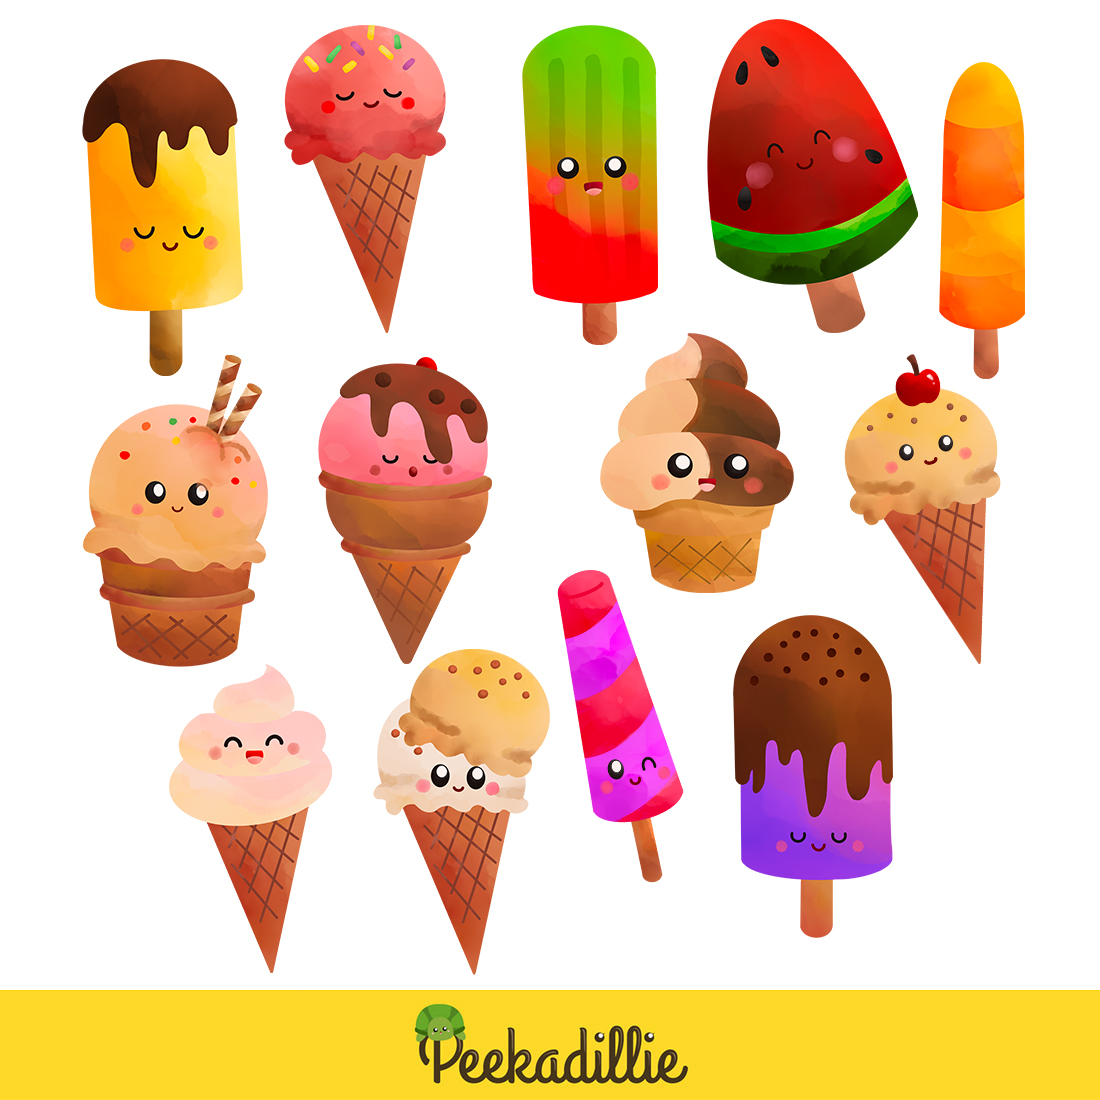 Cute Colorful Watercolour Ice Cream Cone Scoop Dessert Snack Flavored Chocolate Strawberry Fruits Lollipop Illustration Vector Clipart Cartoon preview image.